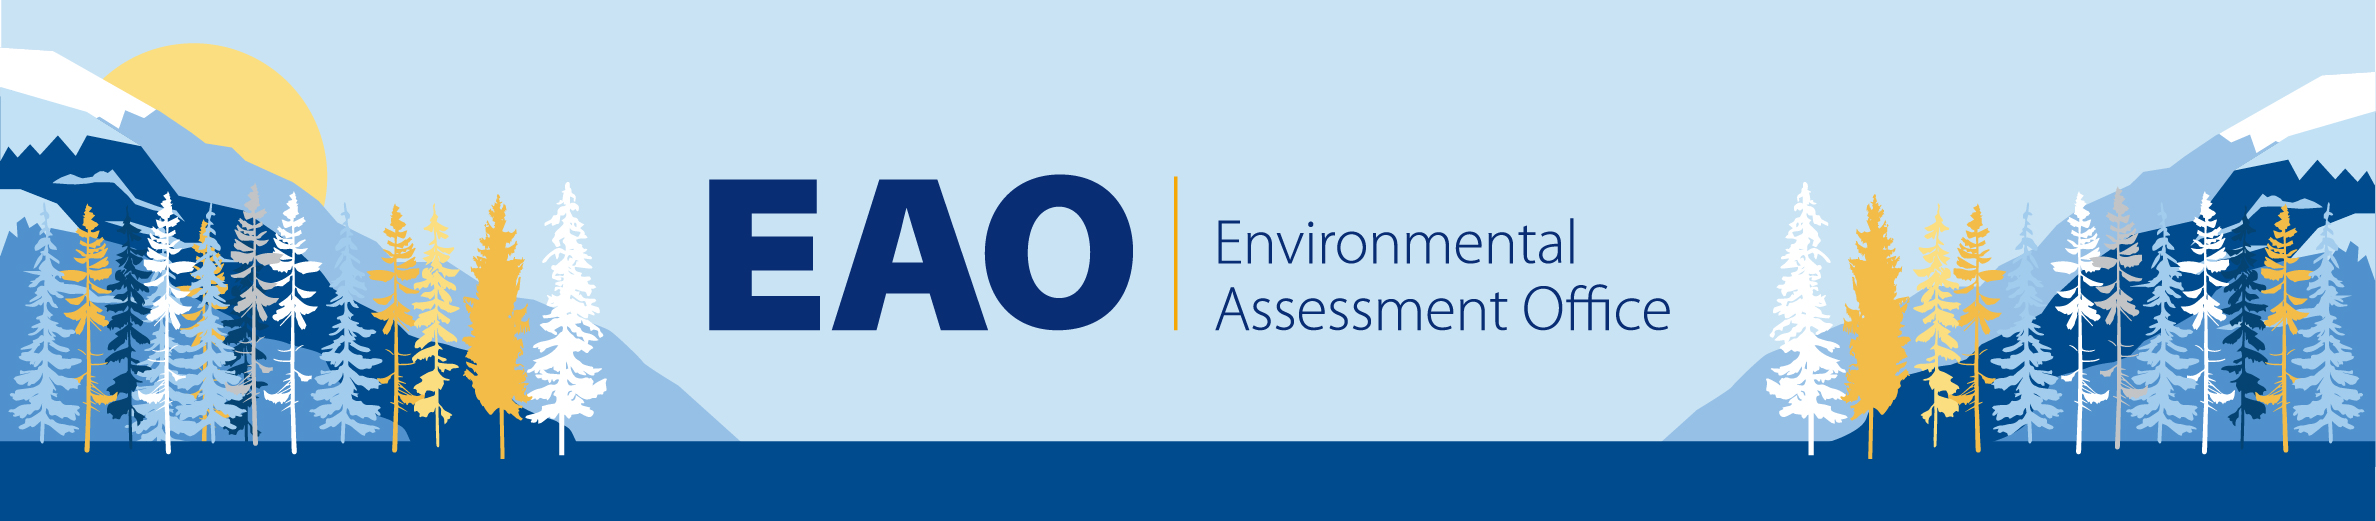 An illustration of mountains, trees, and the sun in blues and yellows with the logo for the Environmental Assessment Office in the center.